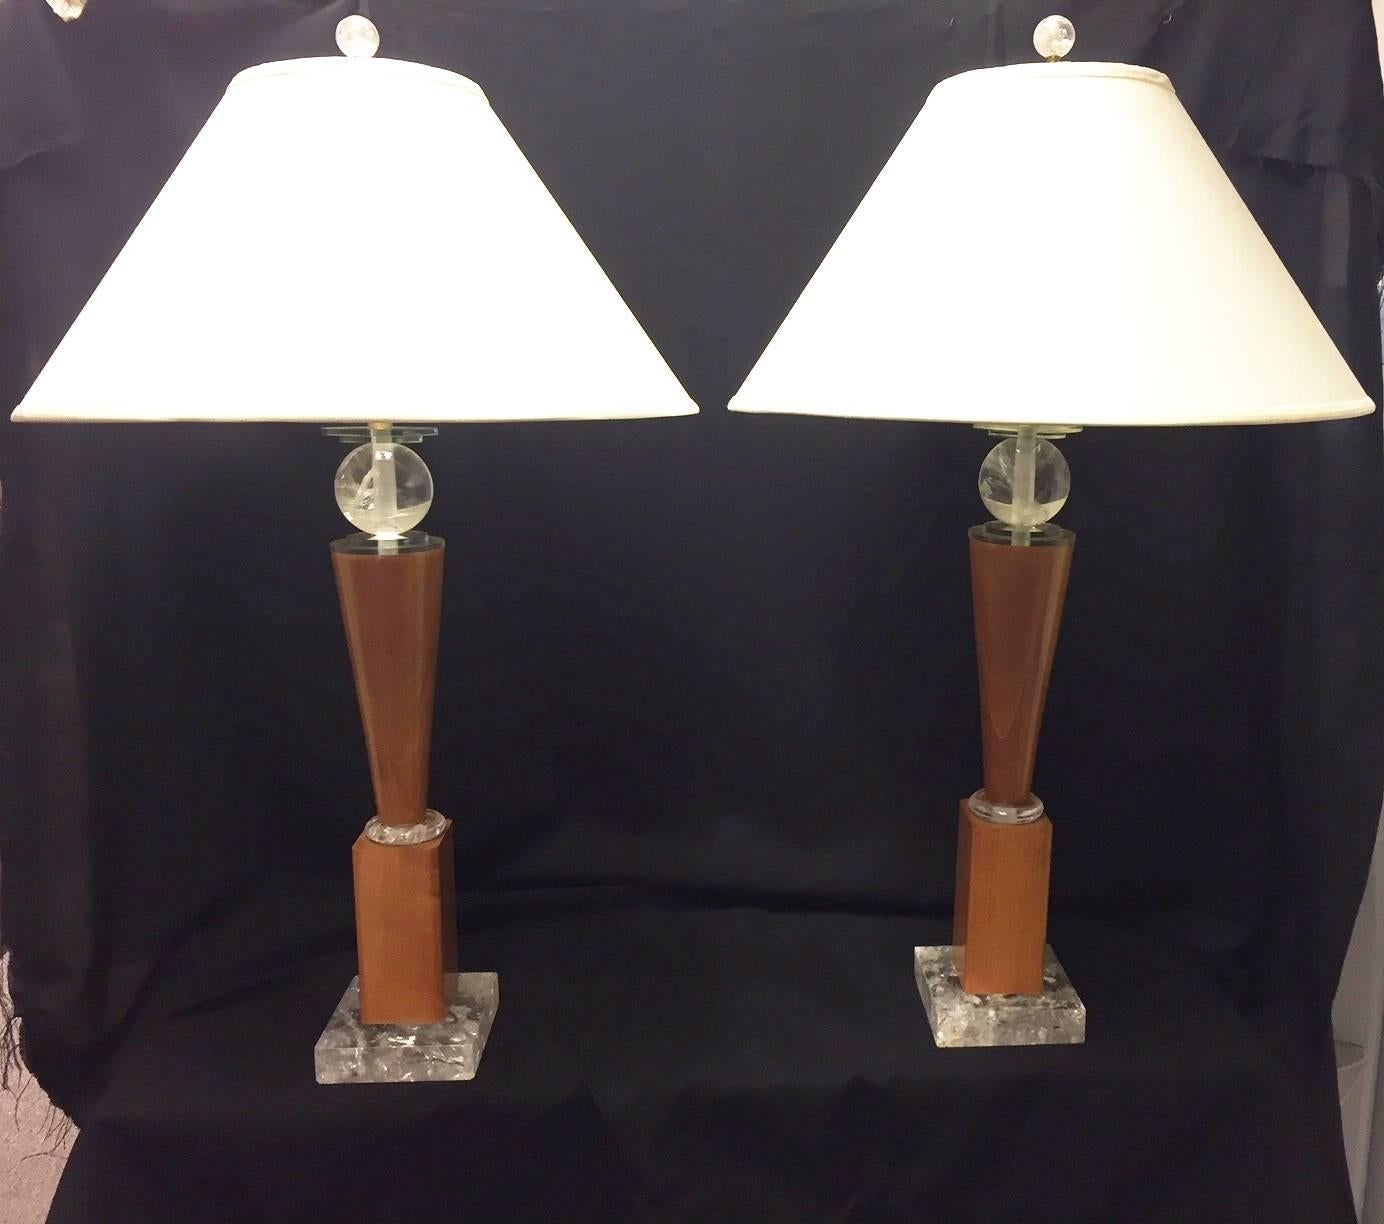 20th Century Pair of Modern Rock Crystal and Wood Lamps with Dupioni Silk Shades